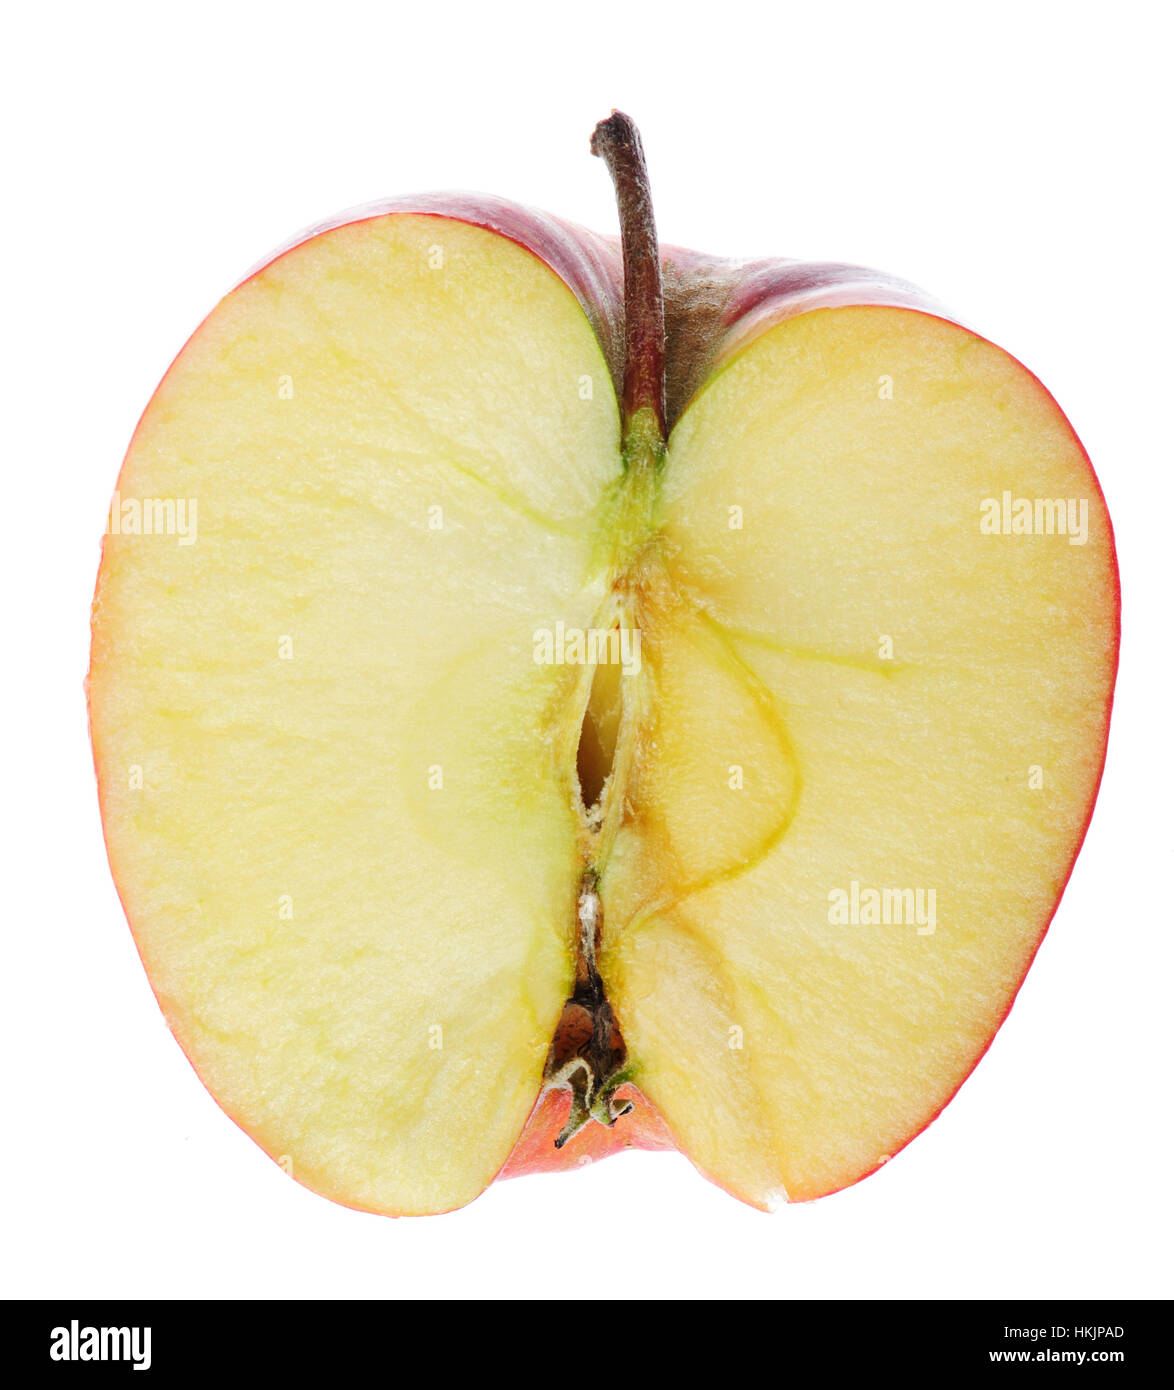 318,257 Apple Slices Images, Stock Photos, 3D objects, & Vectors